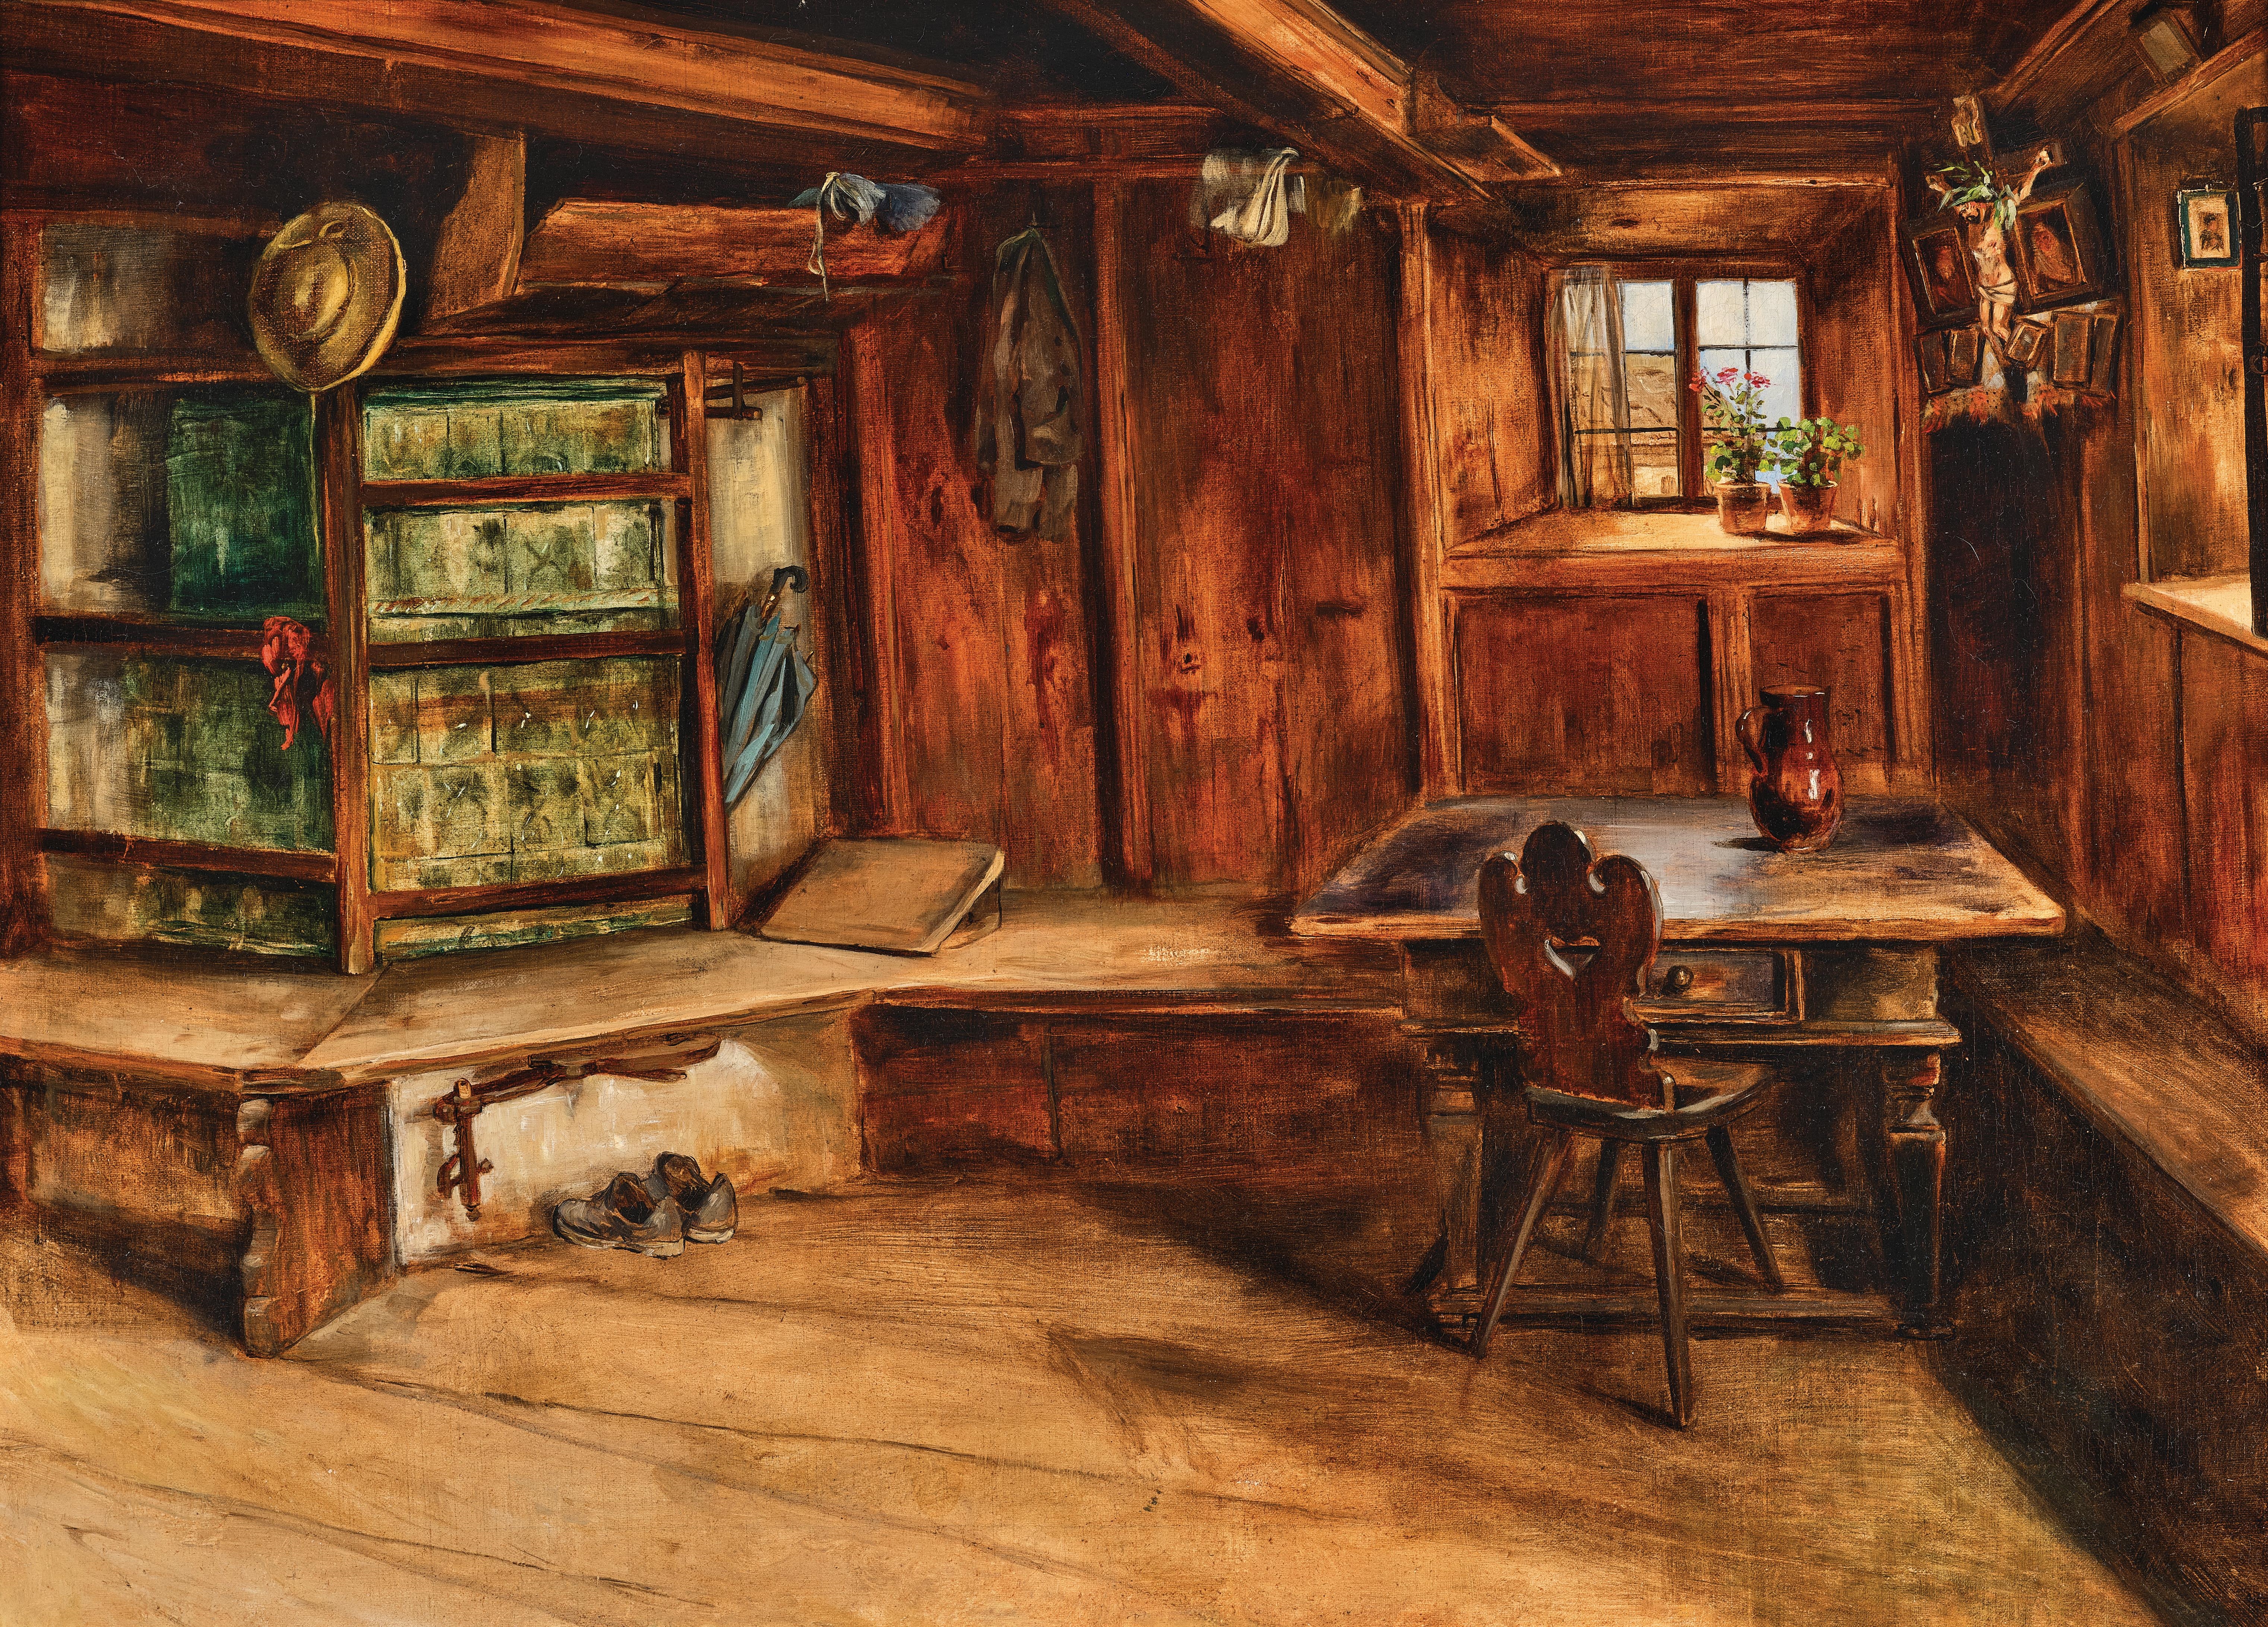 A Living Room in Tyrol (Tyrolean Oberland) - Thomas Walch